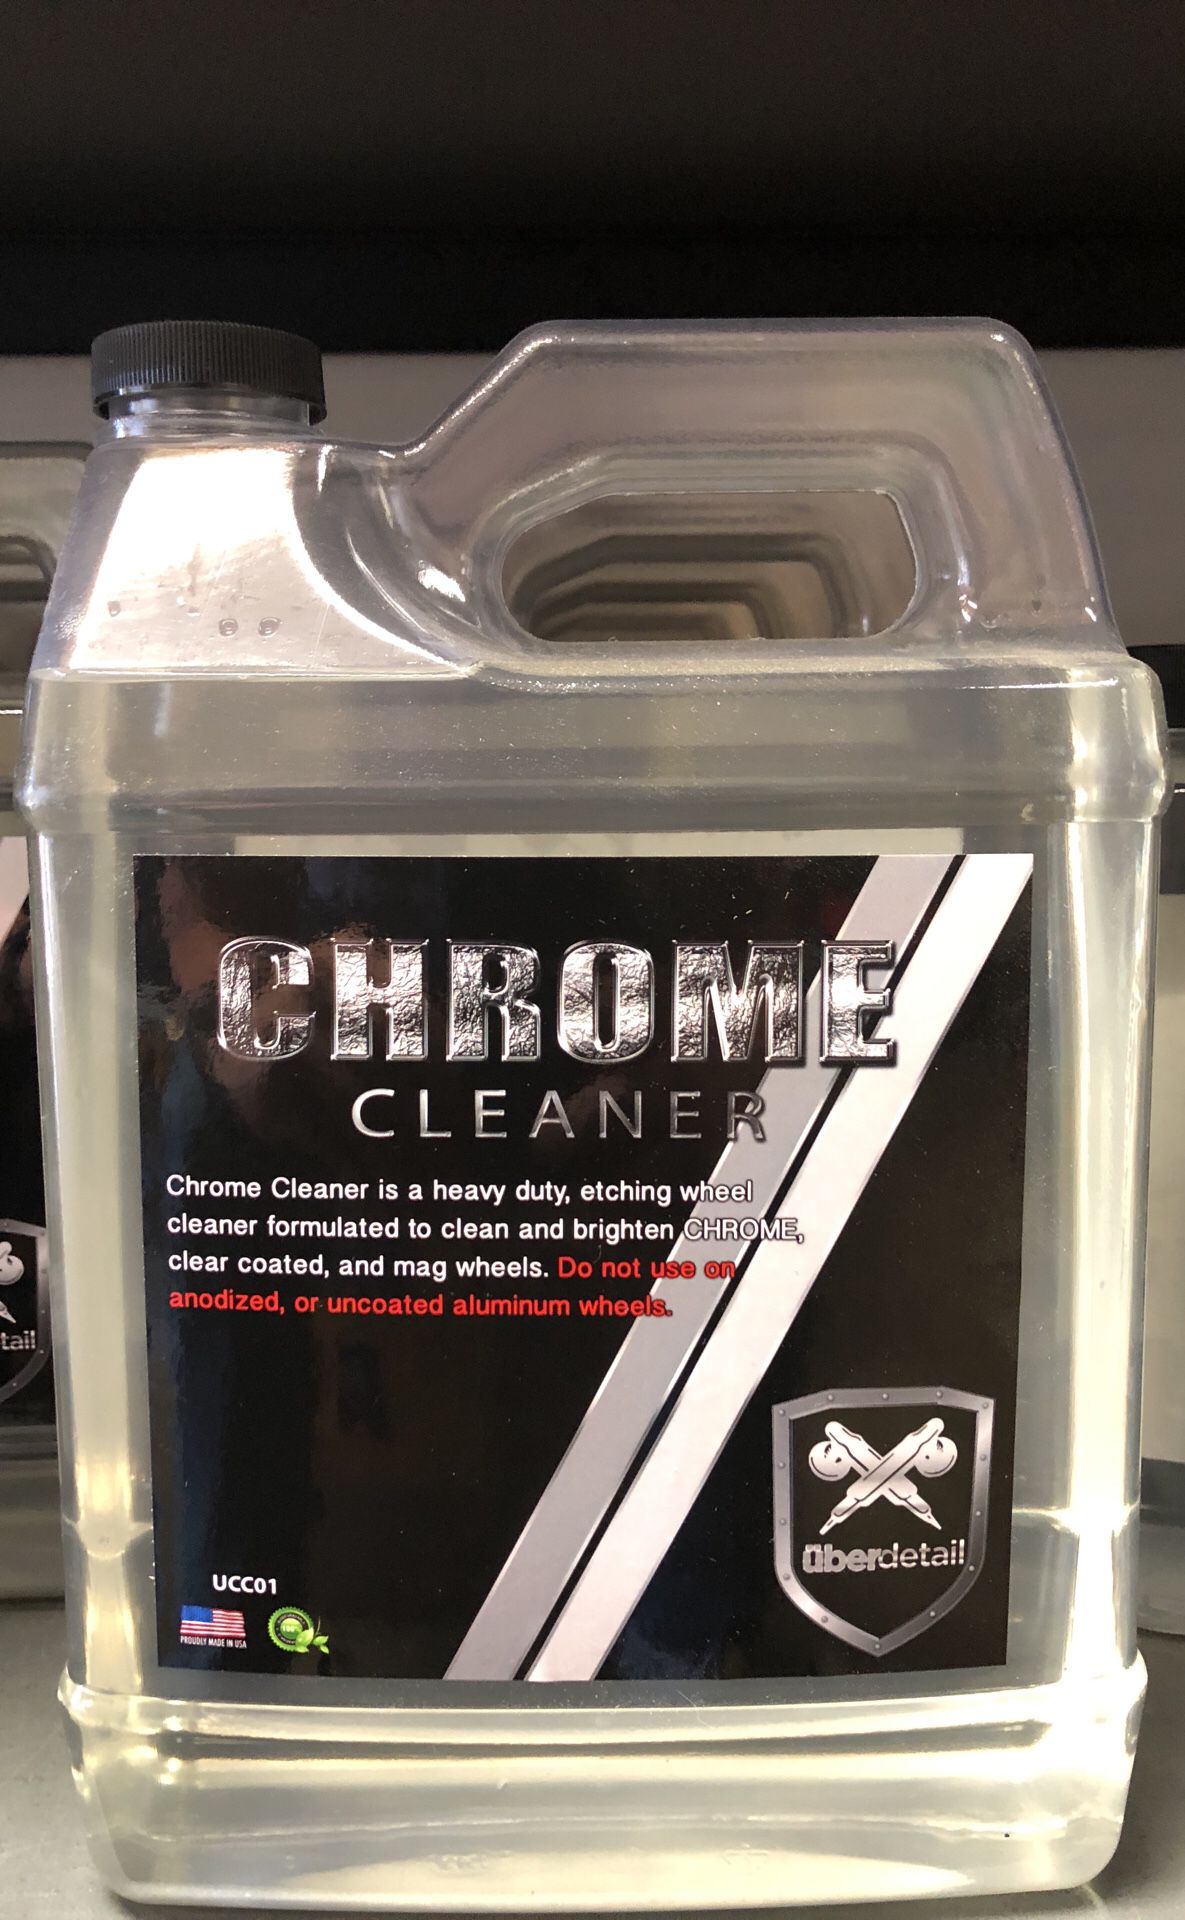 Chrome Cleaner by Uber Detail for Sale in Corona, CA - OfferUp